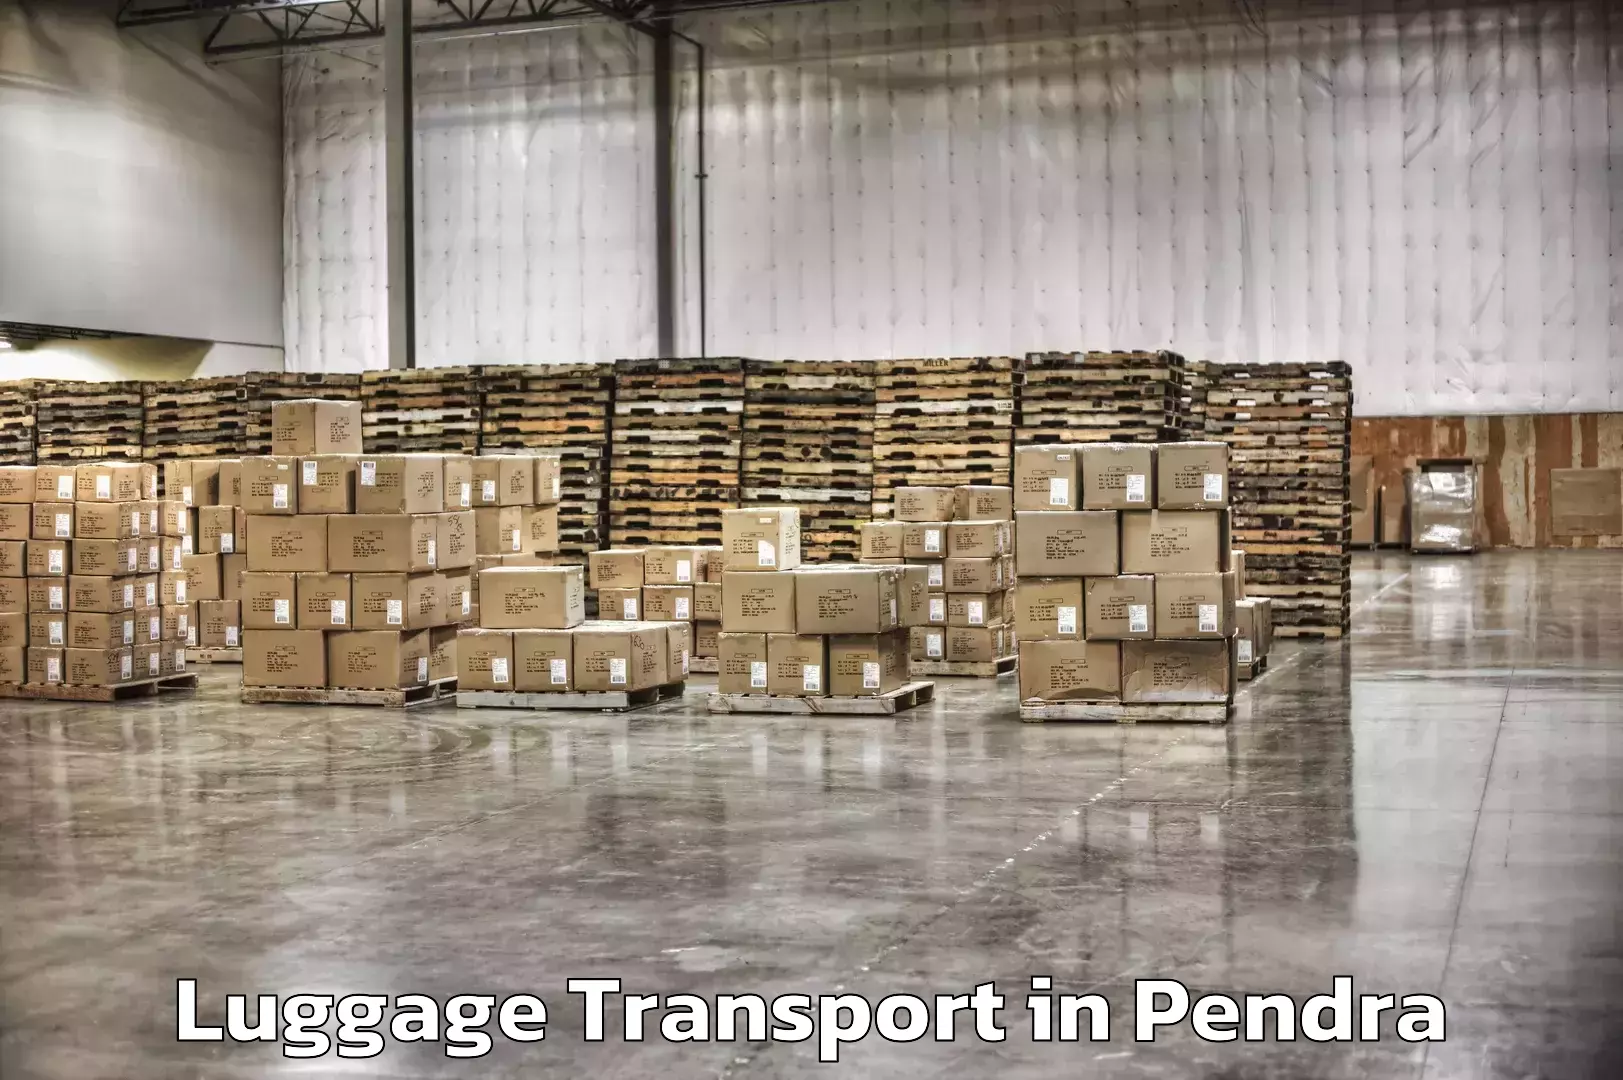 Luggage delivery system in Pendra